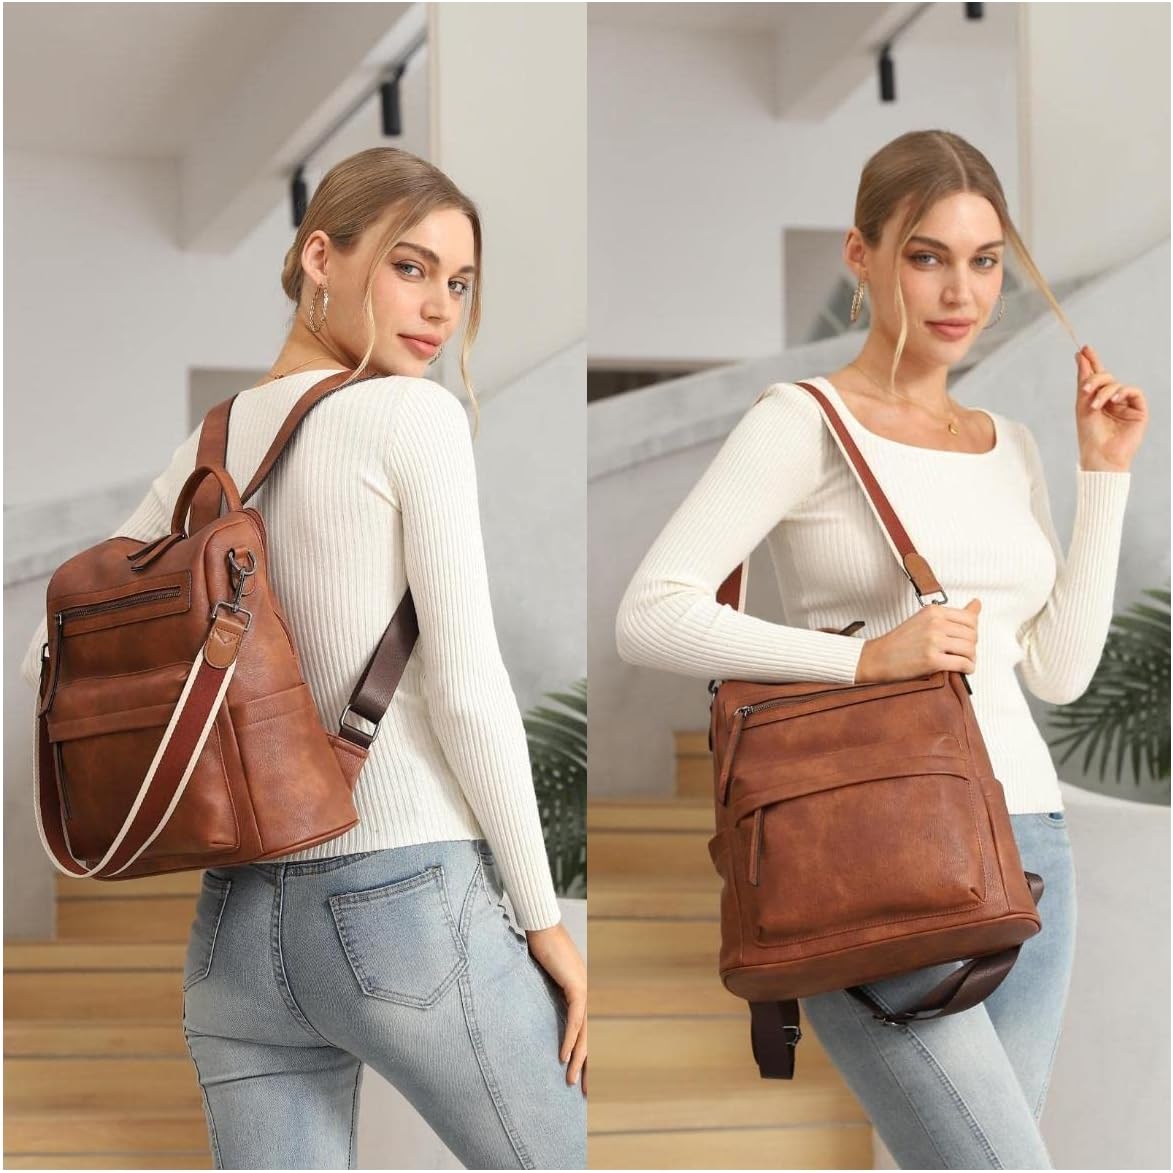 Buy Leather Backpack Purse for Women Designer Ladies Shoulder Bag Fashion  Faux Work Travel Handbags Online In India At Discounted Prices